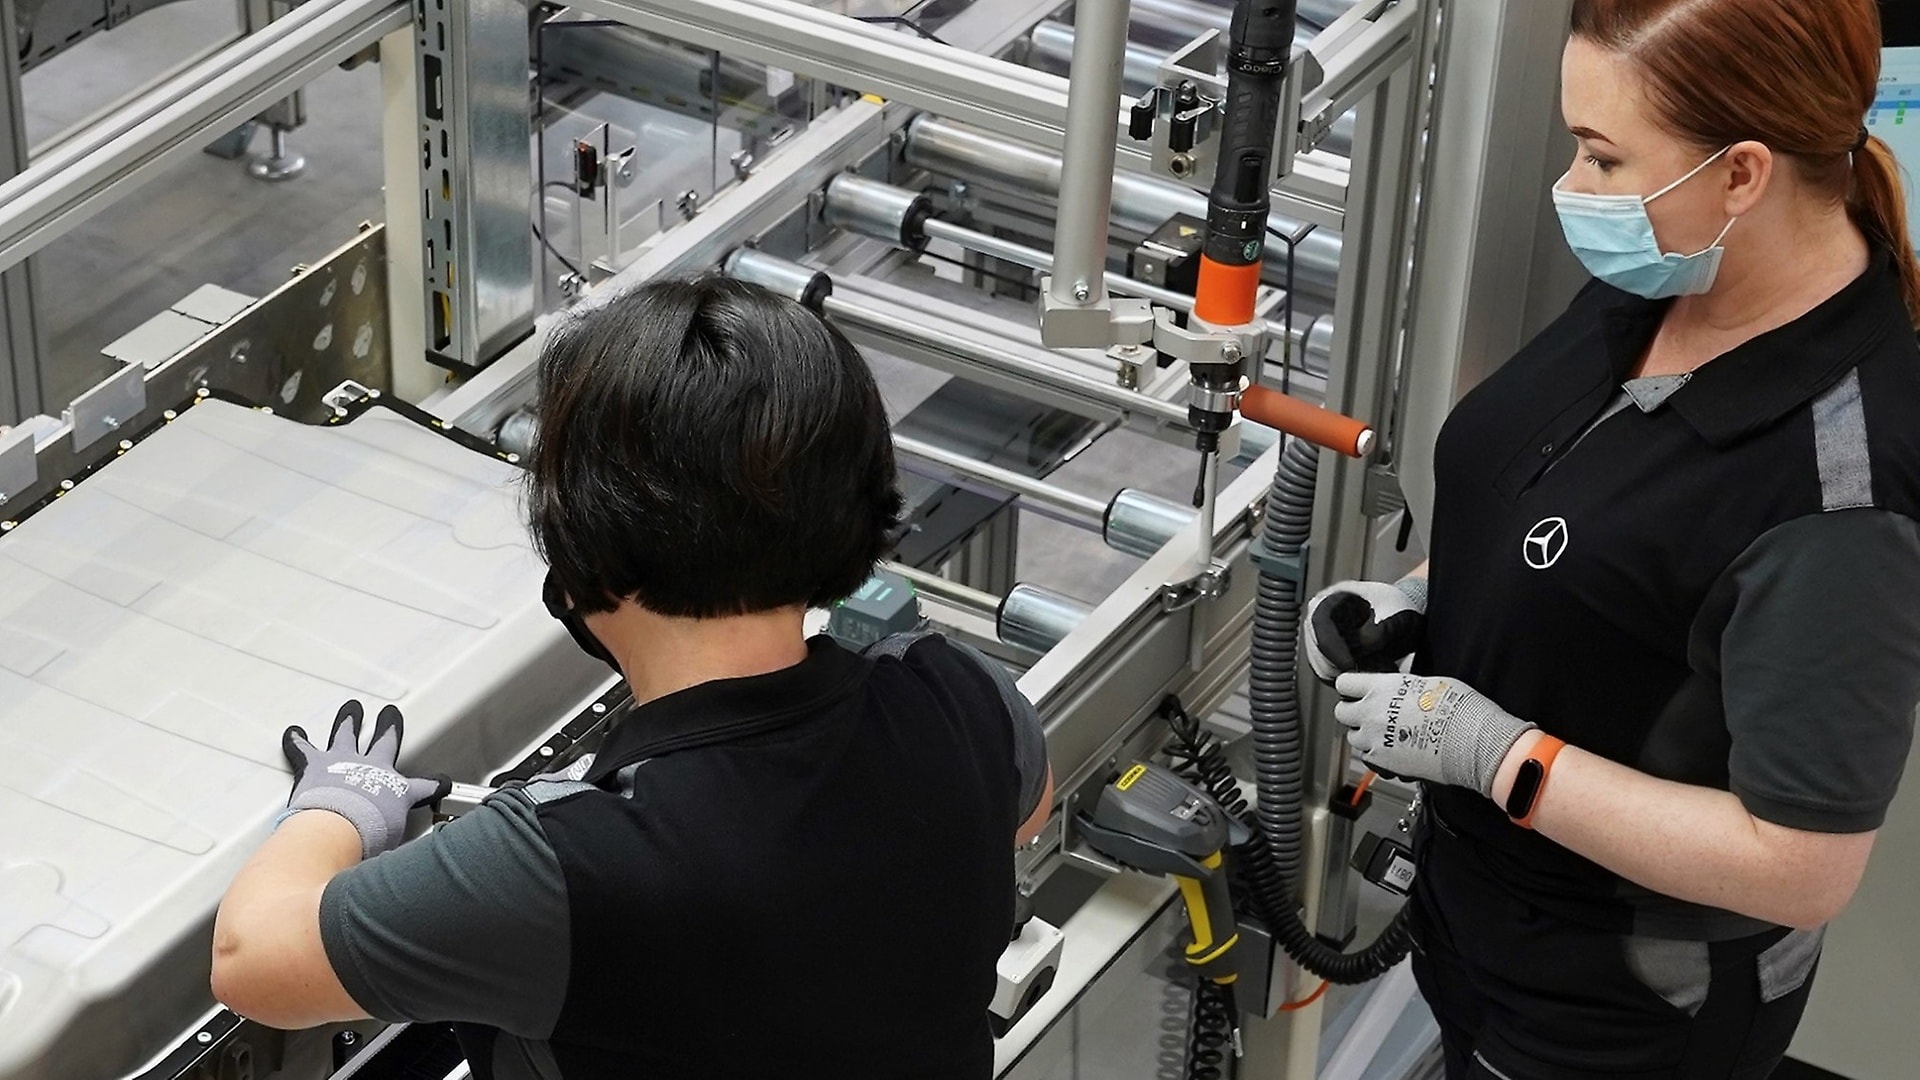 A glimpse into the production of plug-in hybrid batteries for the C-, E- and S-Class at the Mercedes-Benz plant Jawor.